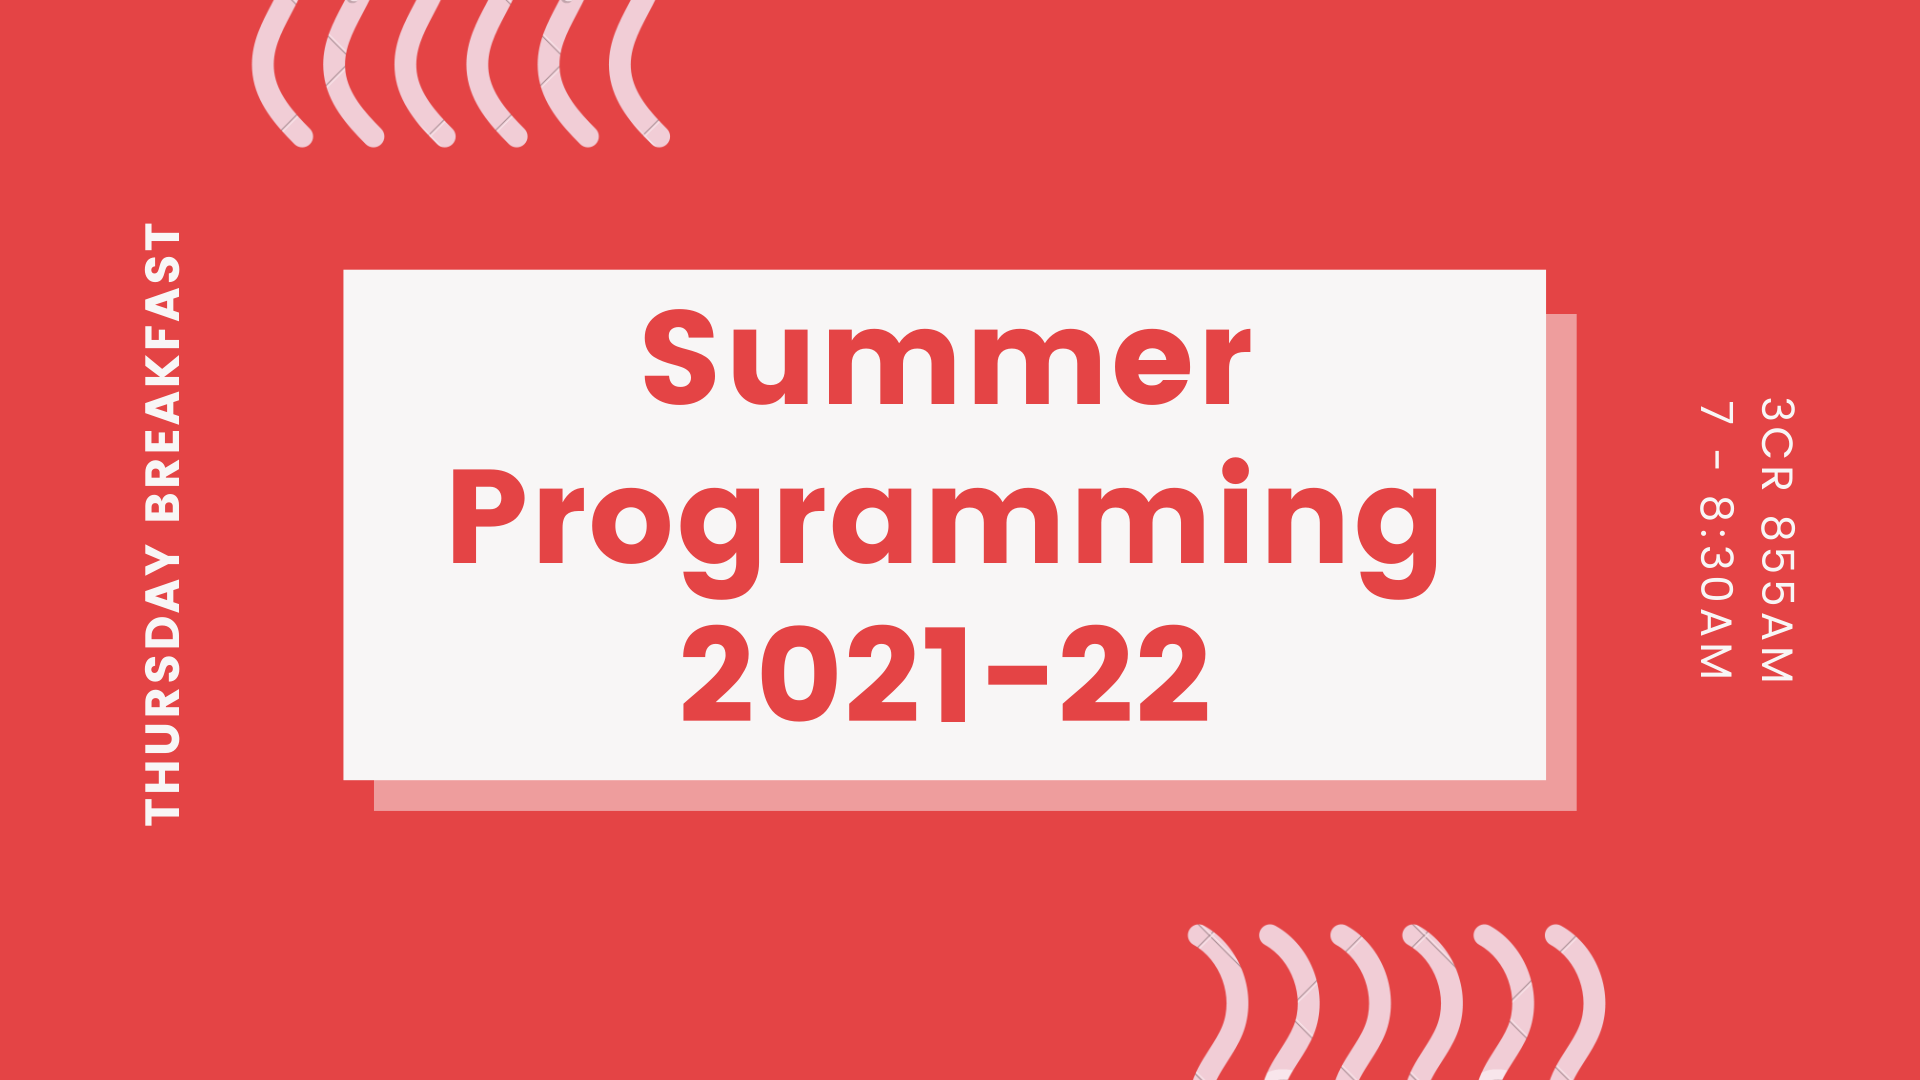 A graphic in shades of red advertising 3CR Thursday Breakfast's Summer Programming. Text in the centre is in red on a white background and reads 'Summer Programming 2021-22'. Text on the left is oriented vertically and reads 'Thursday Breakfast'. Text on the right is oriented vertically and reads '3CR855AM 7-8:30AM'.